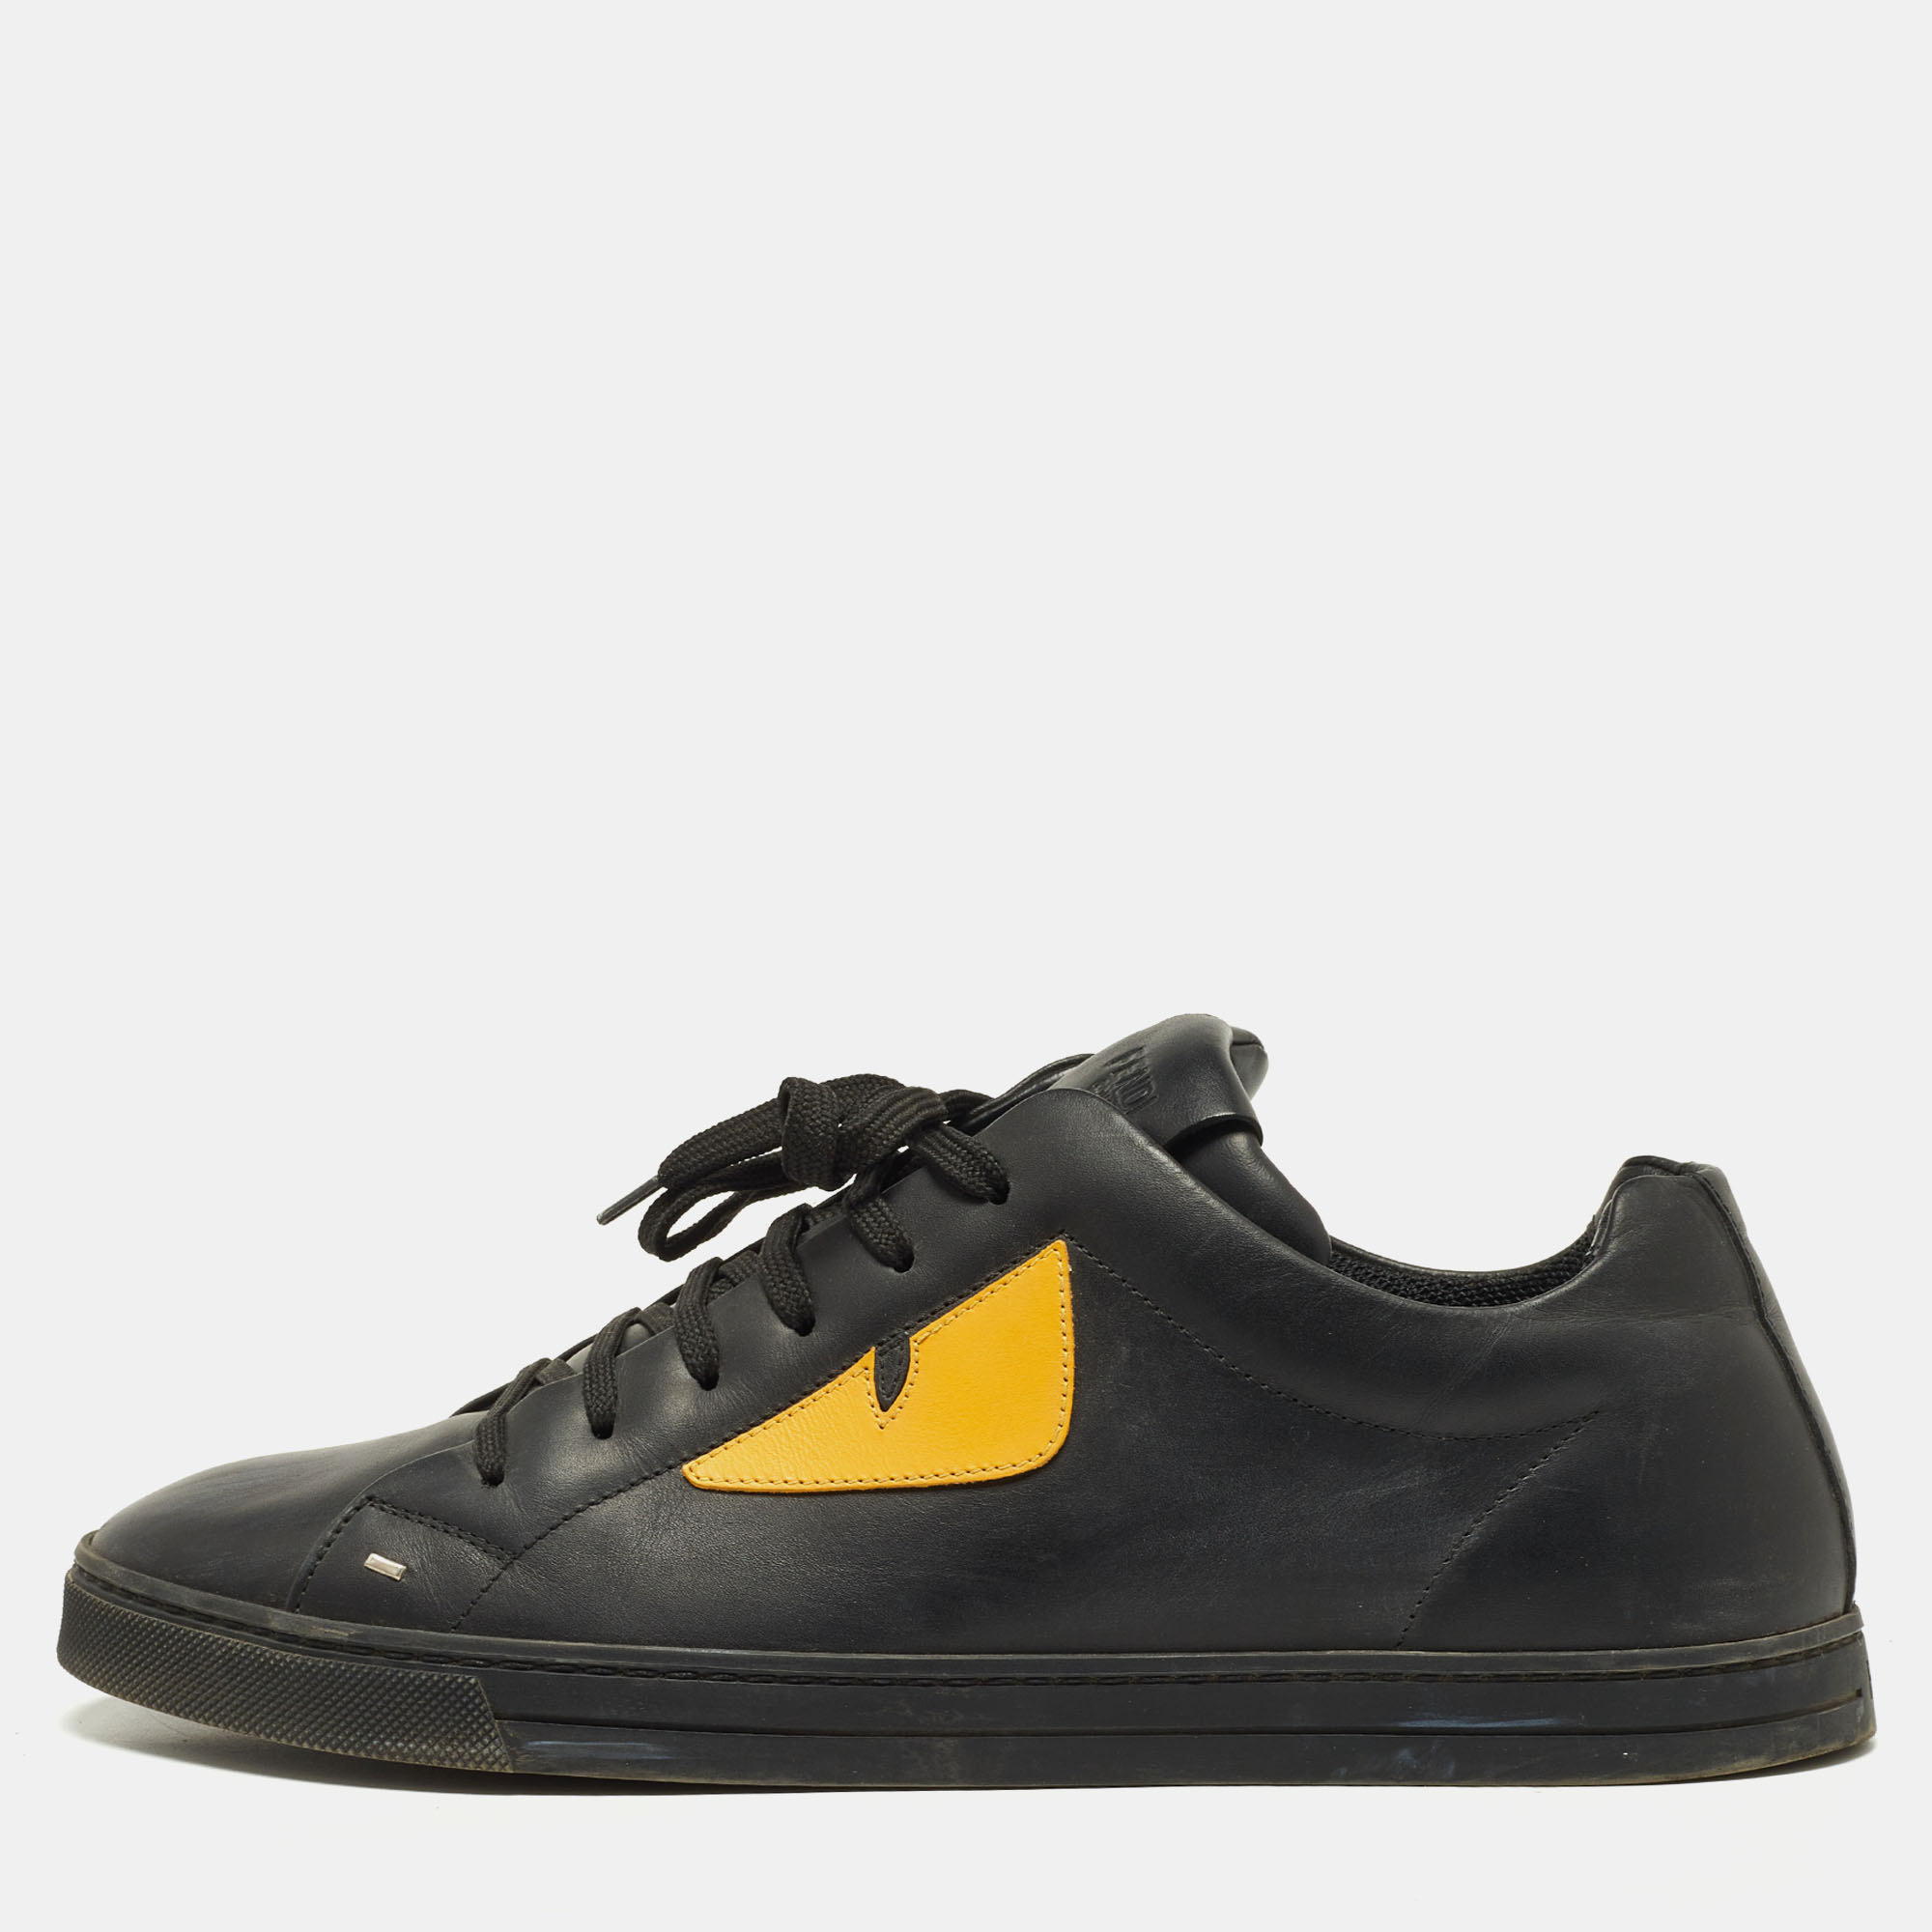 Fendi Black/Yellow Leather Monster Eye Low Top Sneakers Size 41